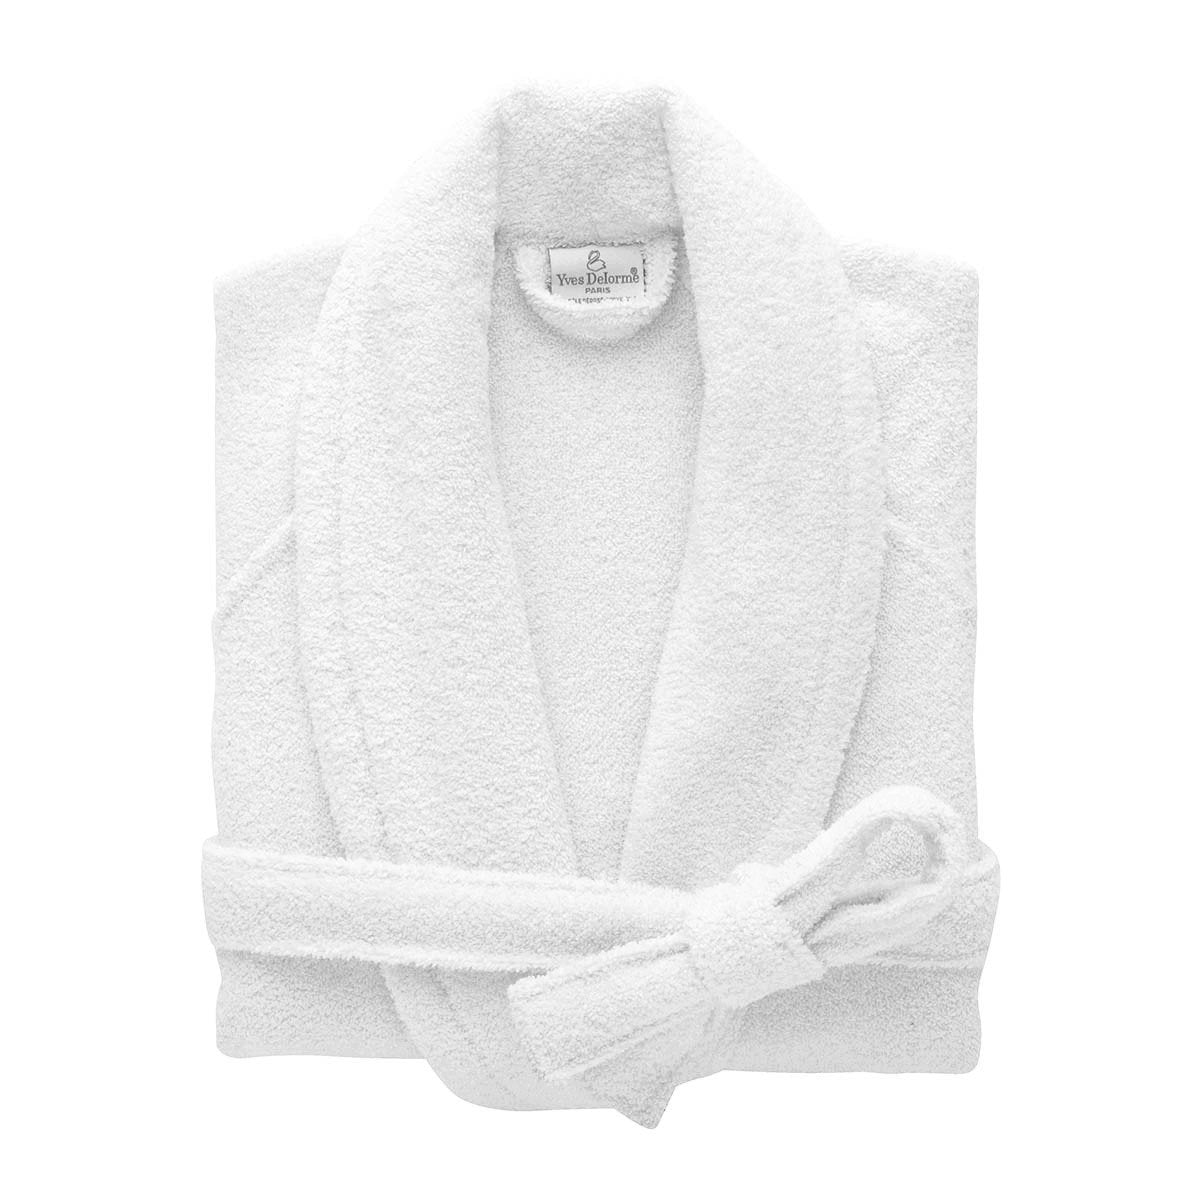 Etoile Blanc White Bathrobe by Yves Delorme | Fig Linens - robe with pockets and belt